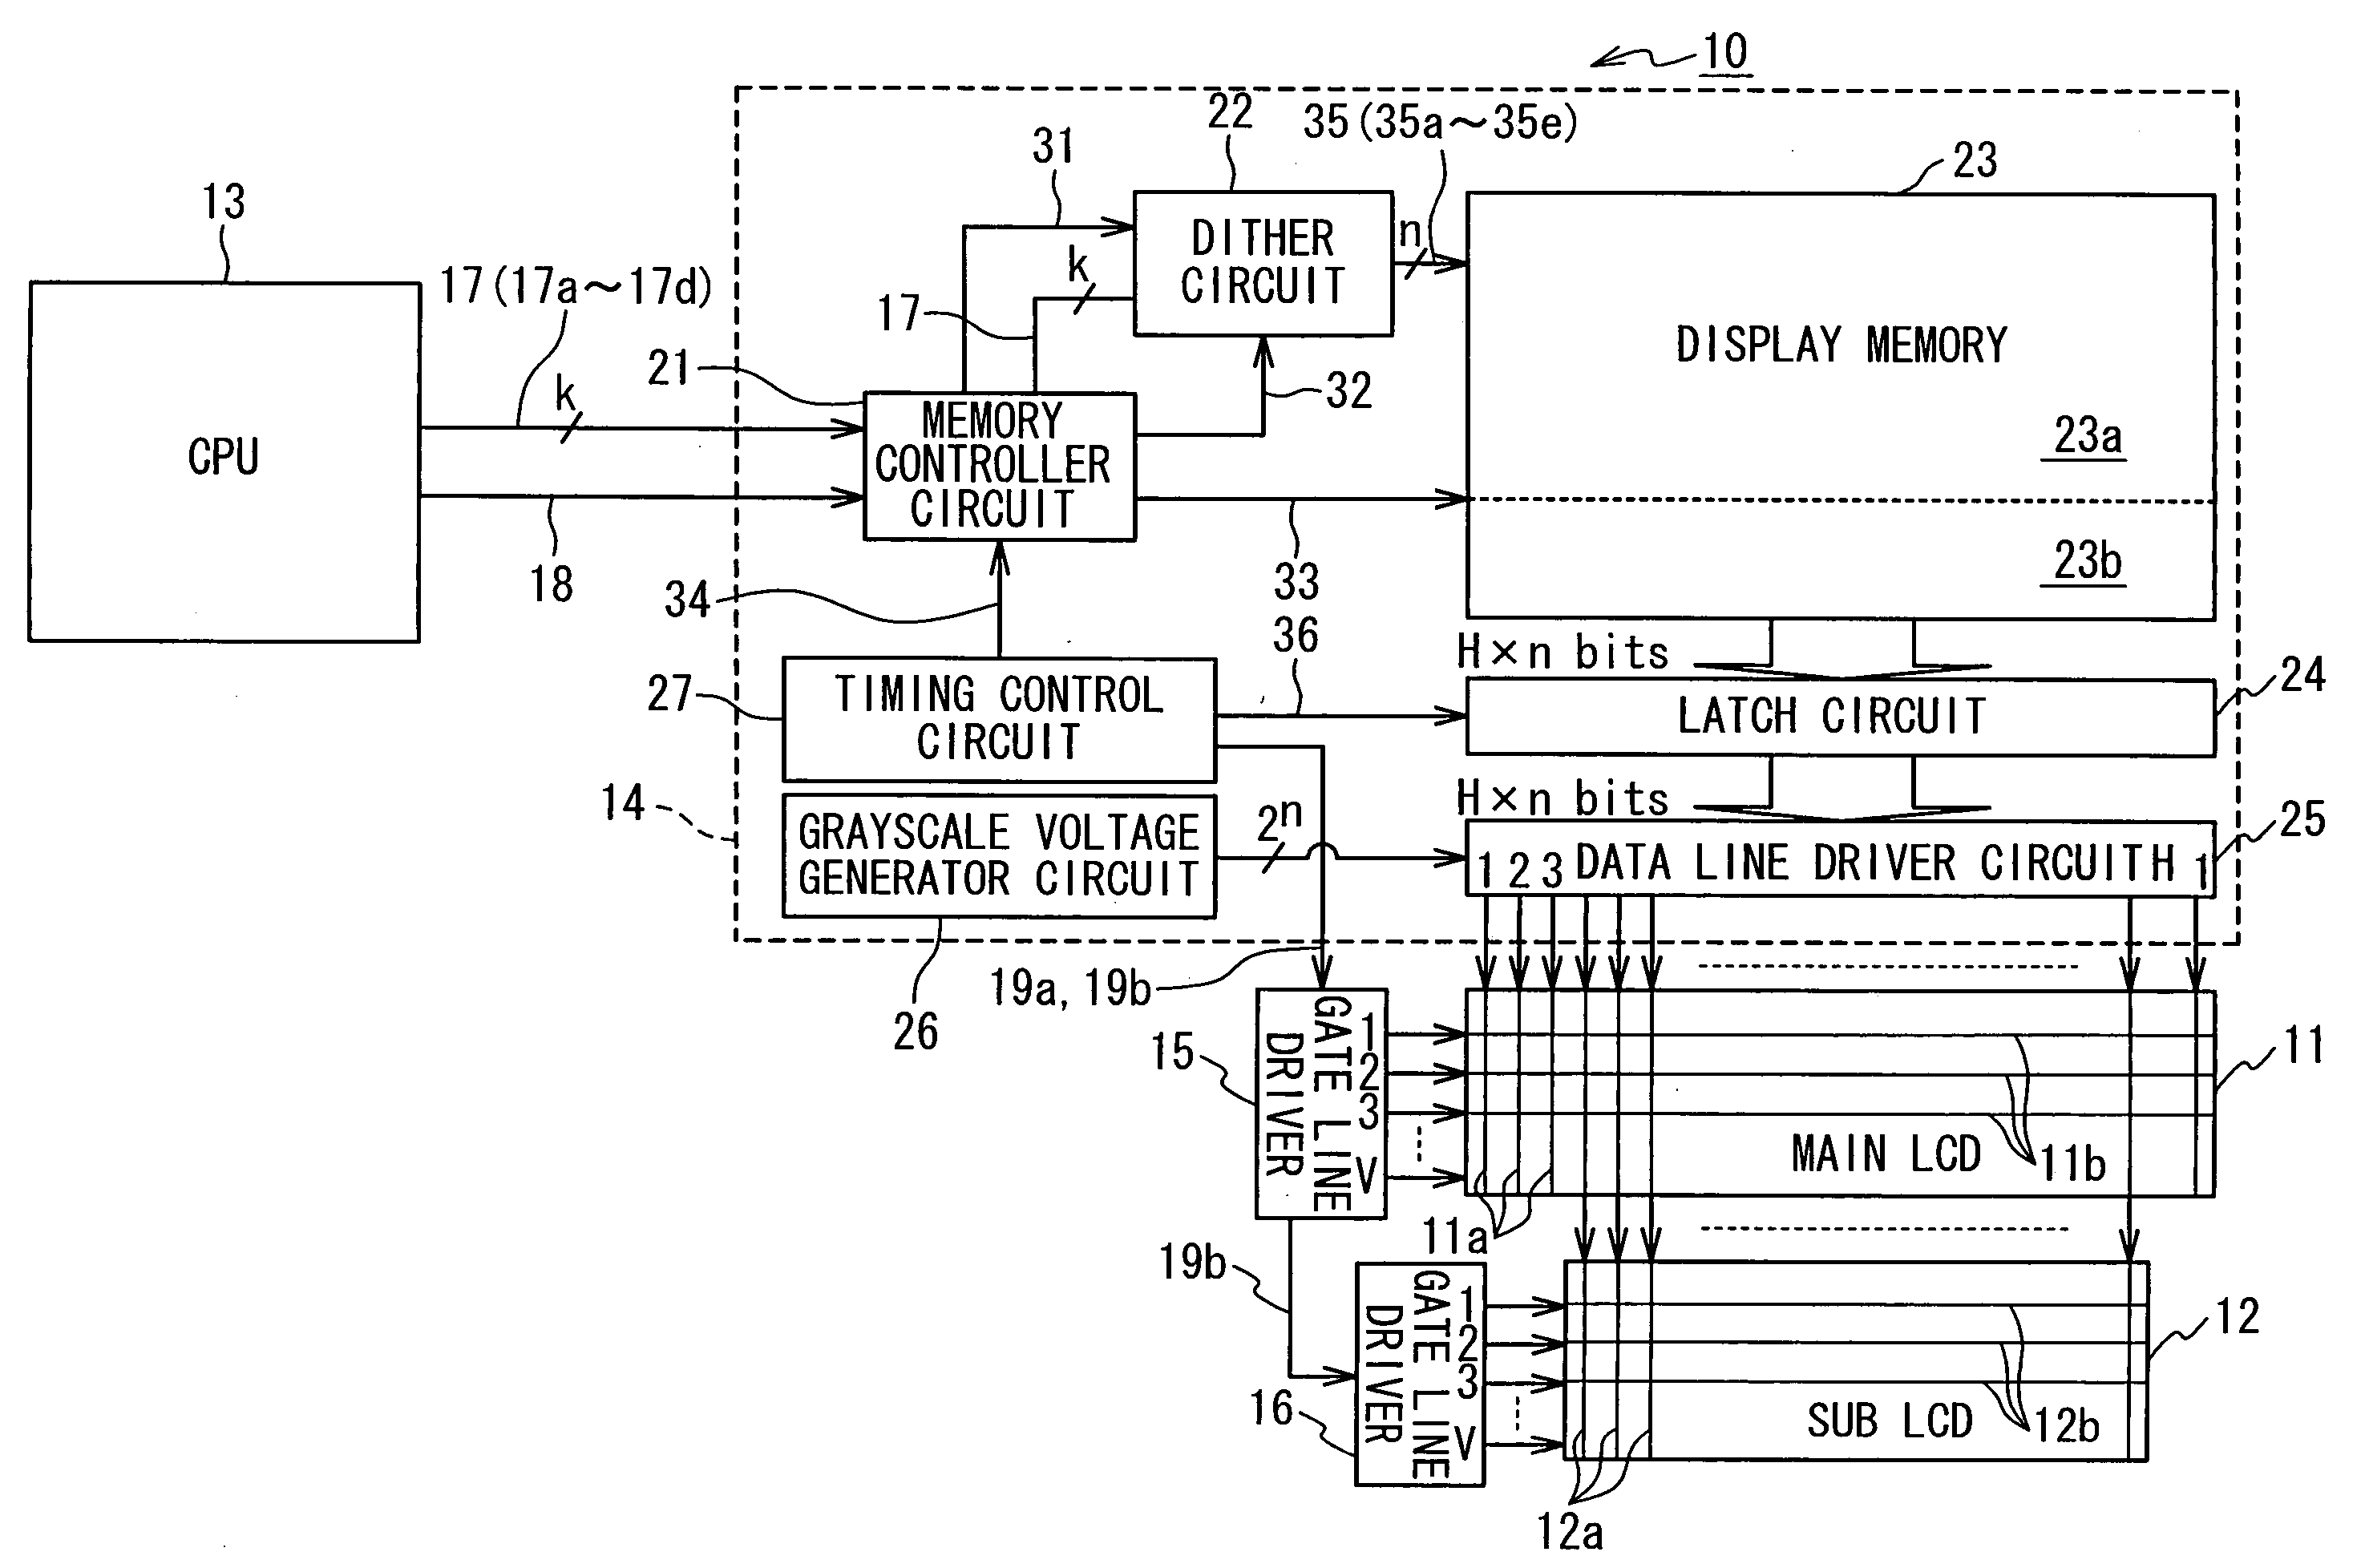 Controller/driver for driving display panel